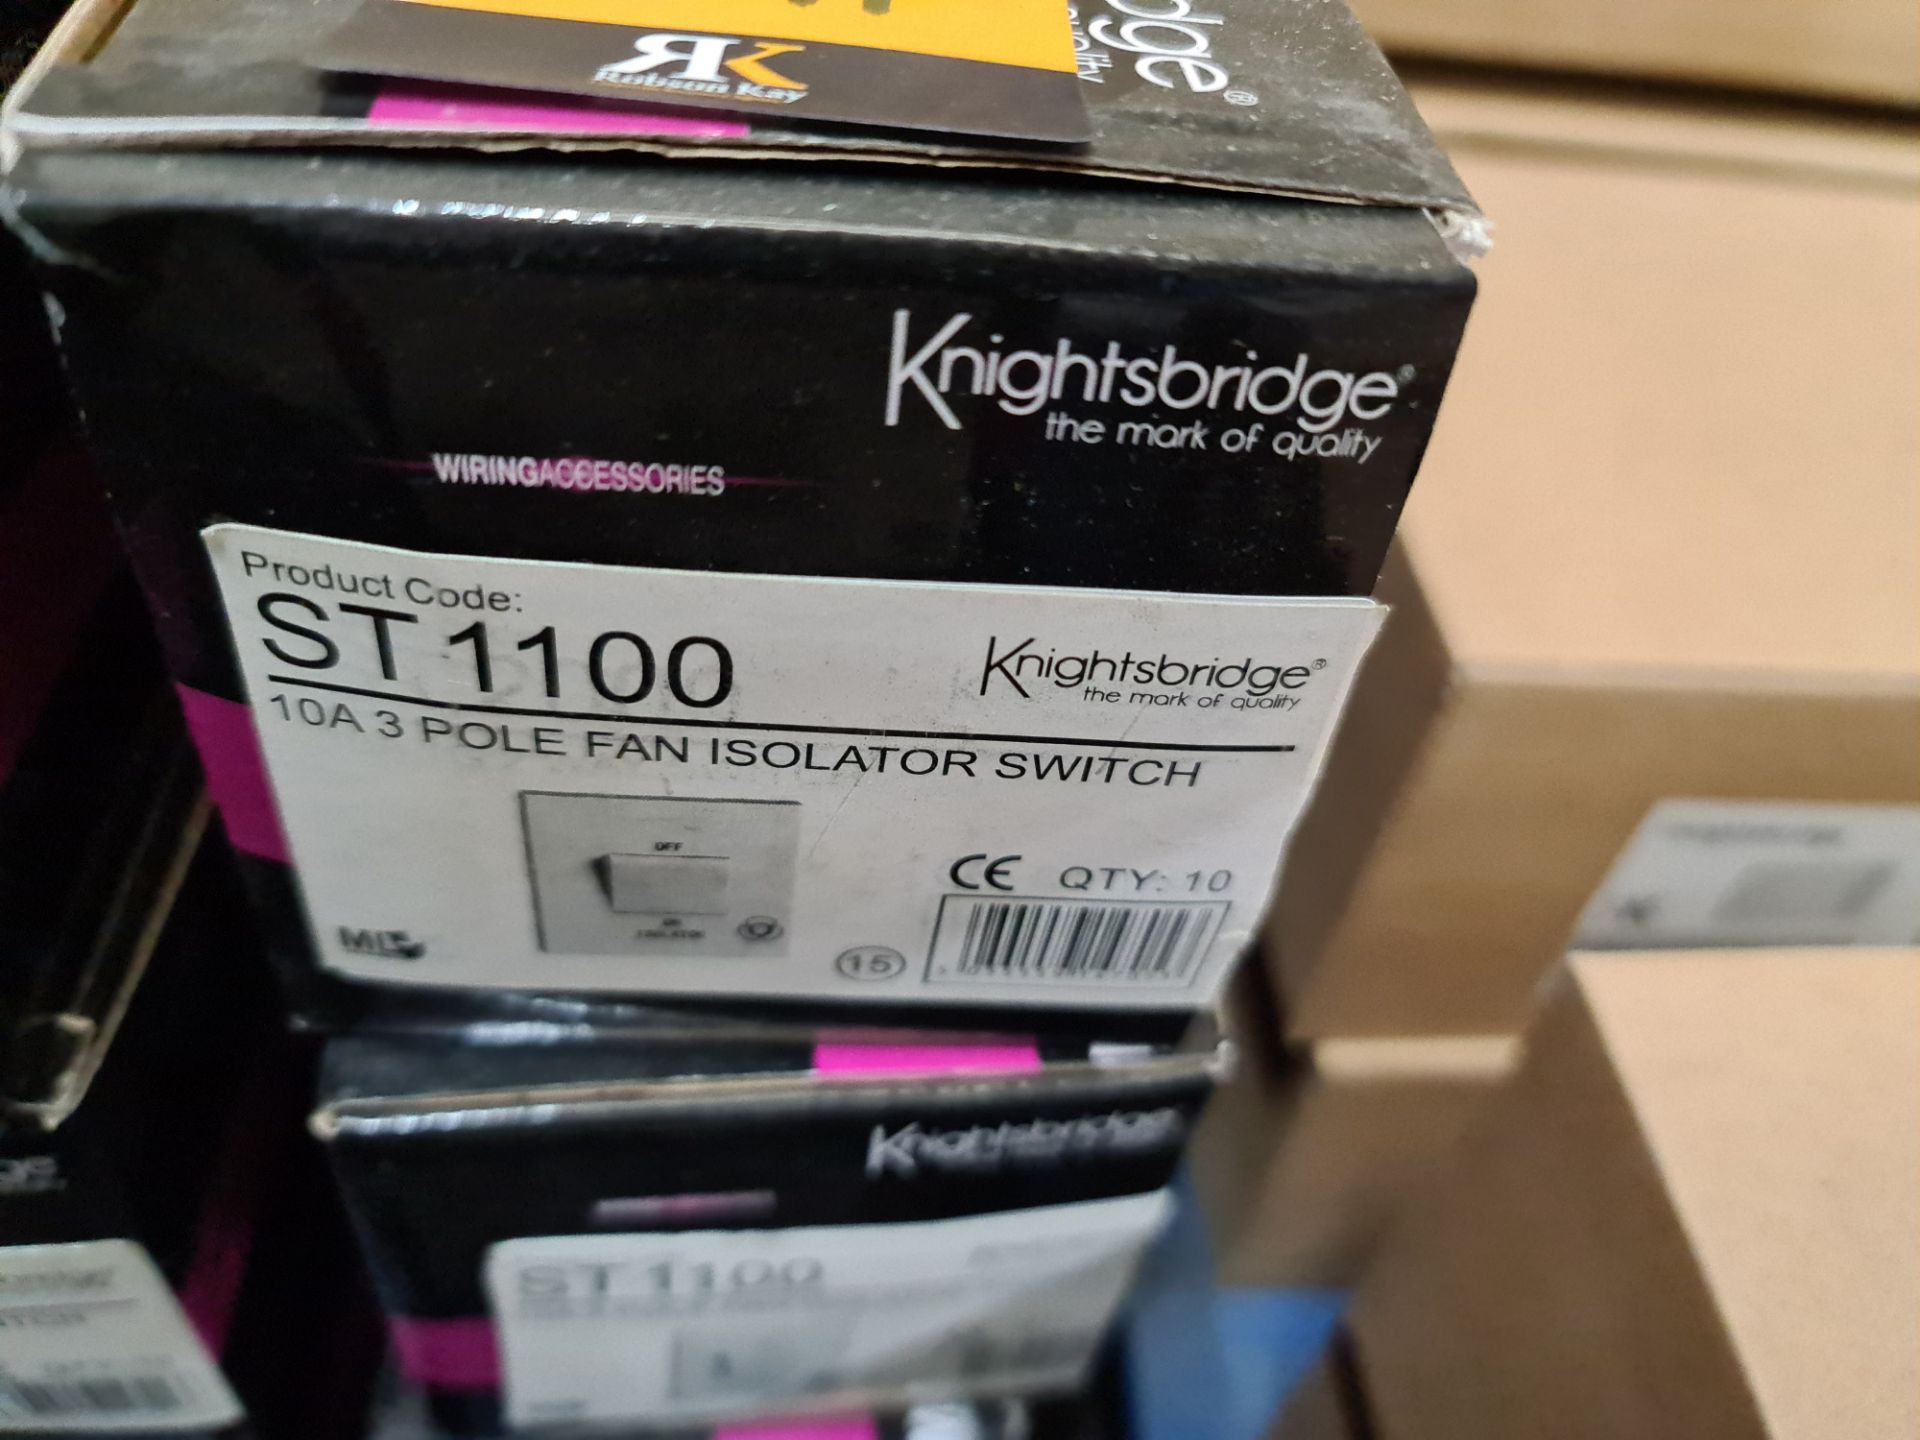 6 boxes of Knightsbridge 10amp 3 pole fan isolator switches. Most boxes appear full but some boxes a